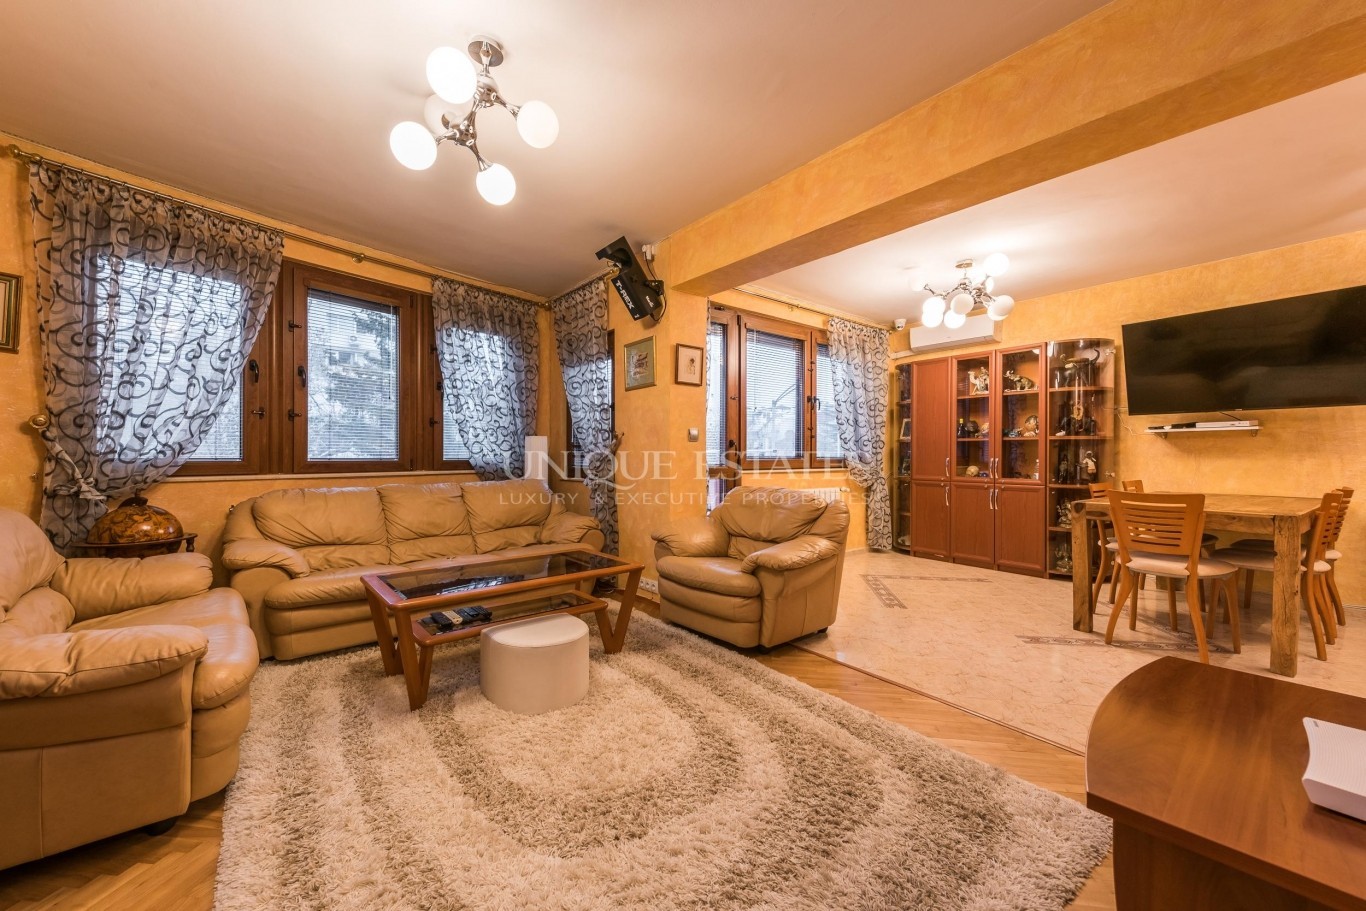 Apartment for sale in Sofia, Ivan Vazov with listing ID: K8929 - image 1